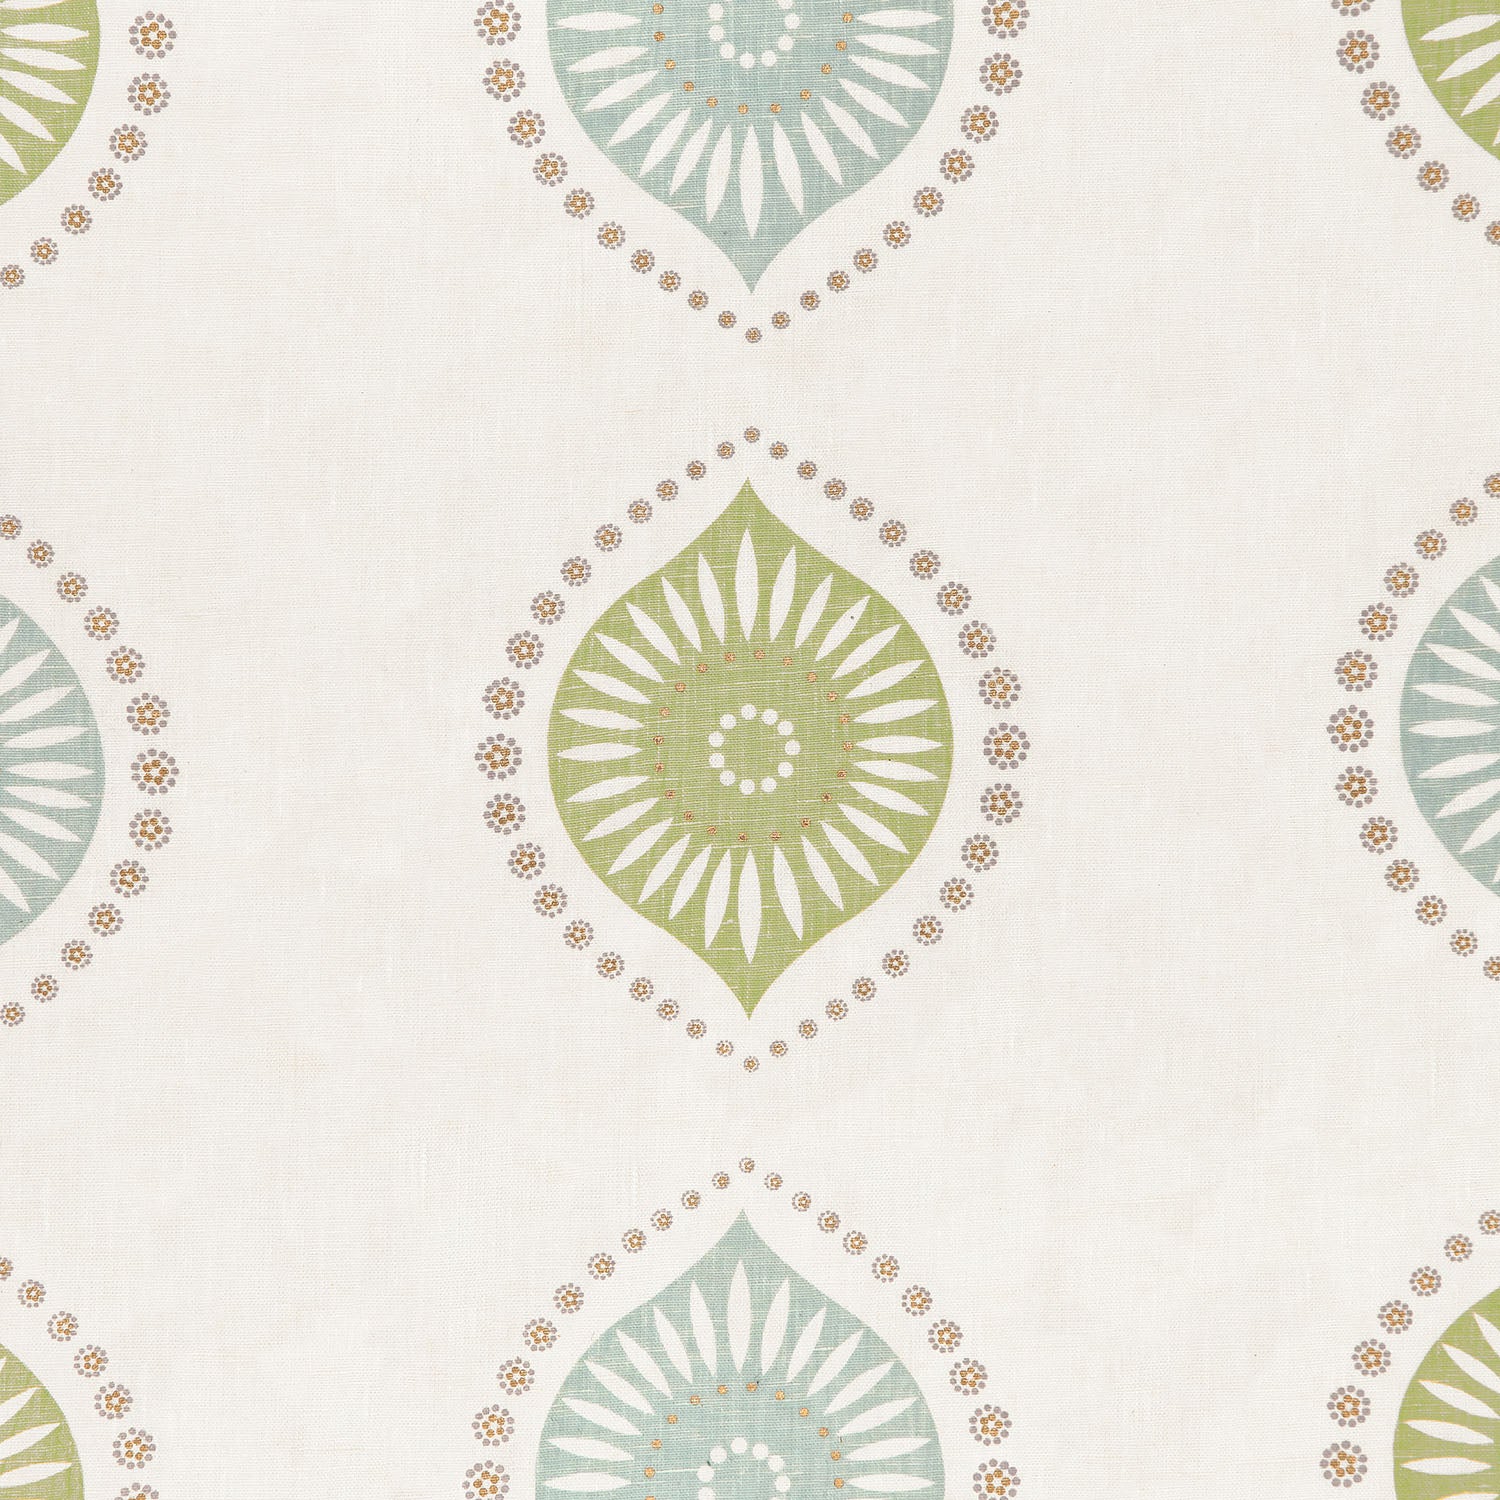 Fabric with a repeating floral print in blue, green and tan on a cream field.